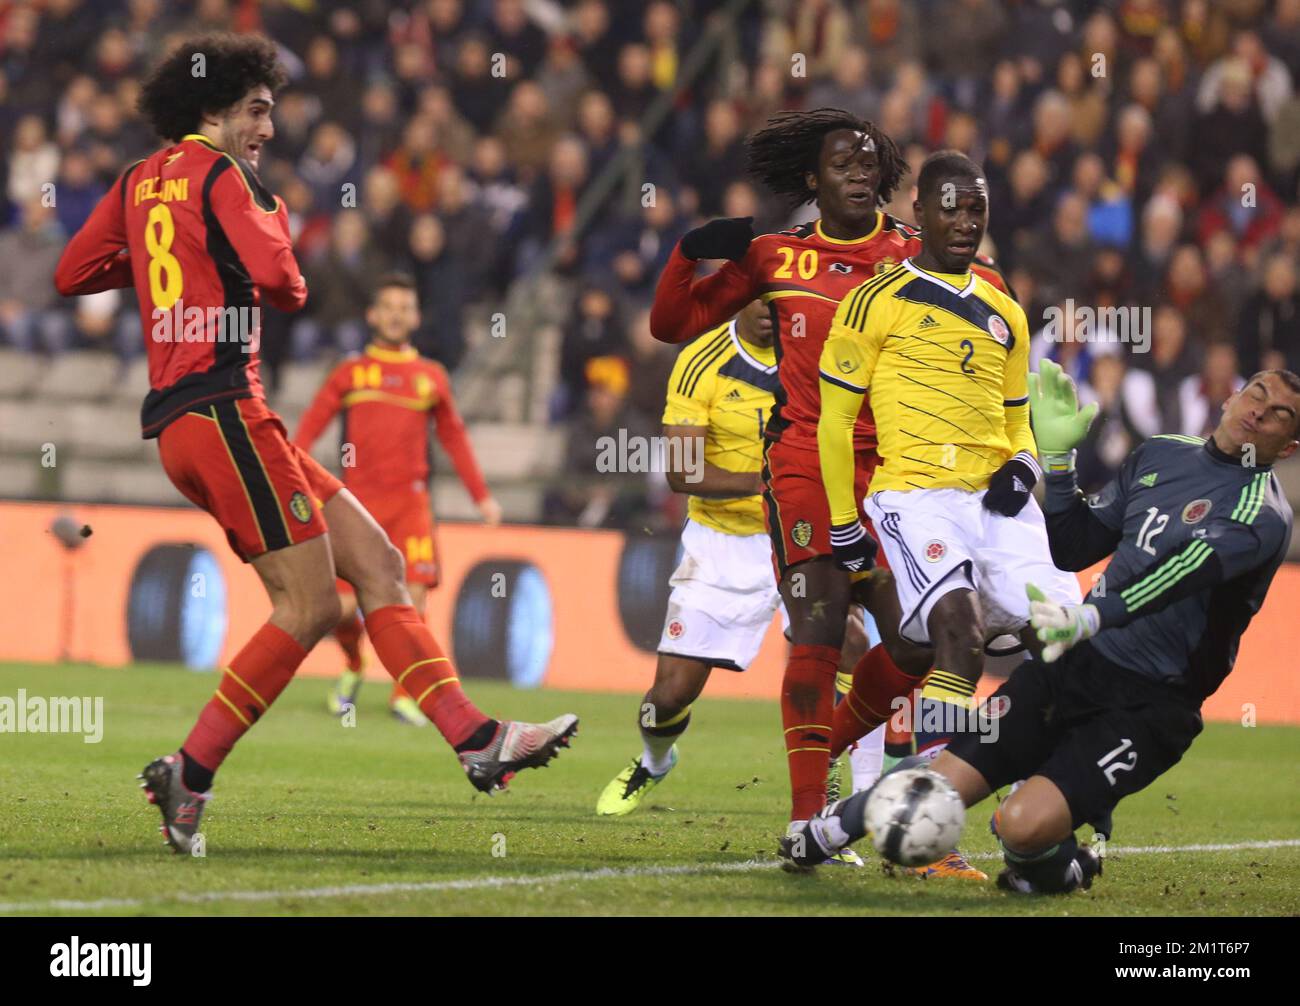 Belgium's Marouane Fellaini, Belgium's Romelu Lukaku, Colombia's Cristian Zapata and Colombia's goalkeeper Faryd Mondragon fight for the ball during a friendly soccer game between the Belgian national soccer team Red Devils and Colombia, at the Koning Boudewijn Stadion - Stade Roi Baudouin in Brussels, on Thursday 14 November 2013. BELGA PHOTO VIRGINIE LEFOUR Stock Photo